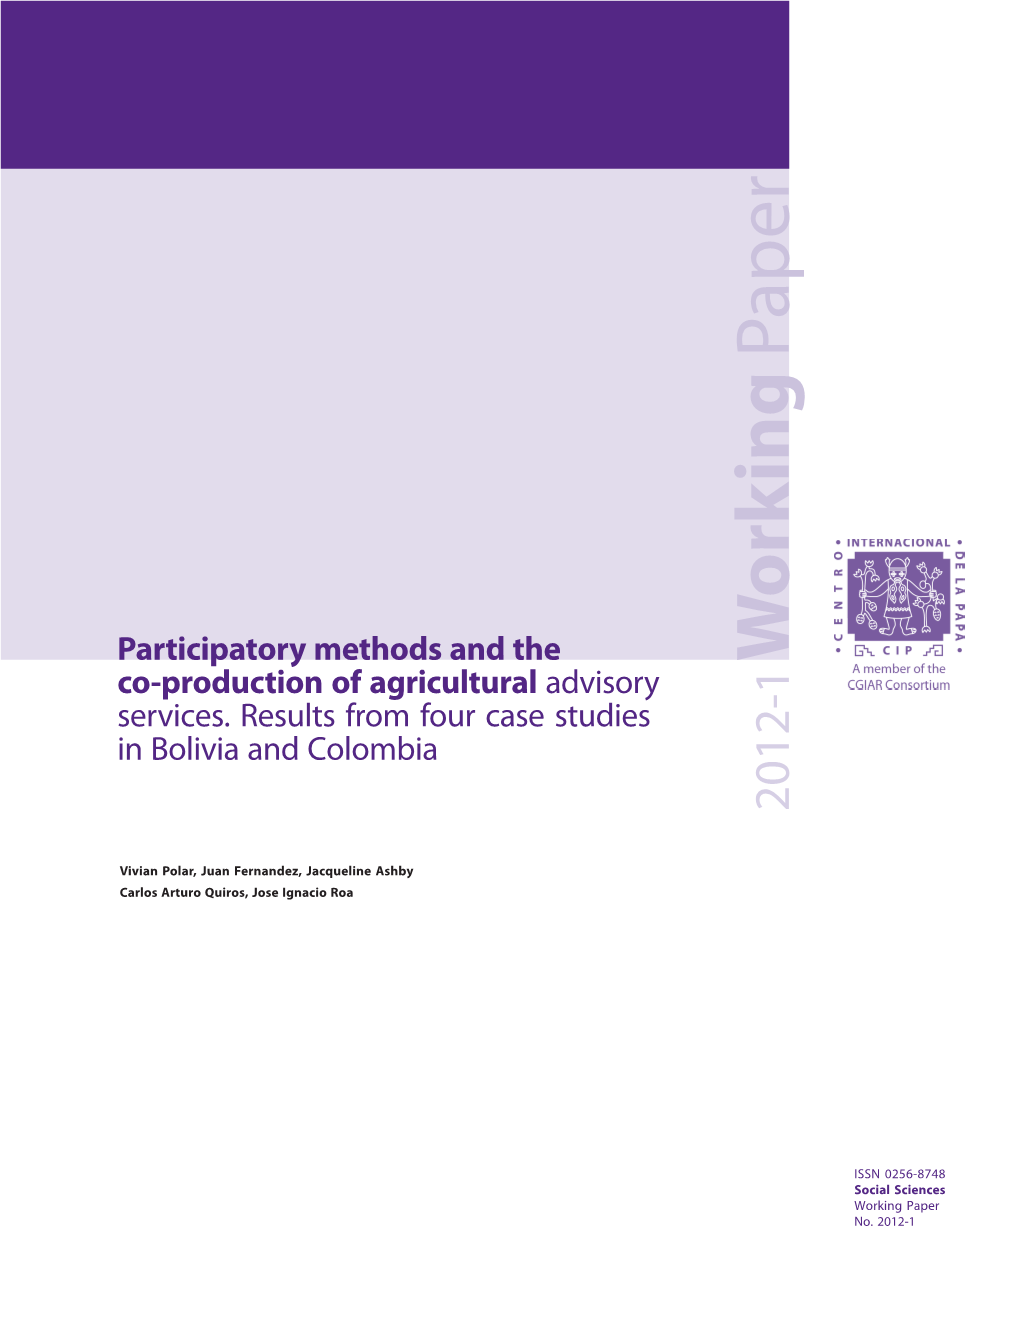 Participatory Methods and the Co- Production of Agricultural